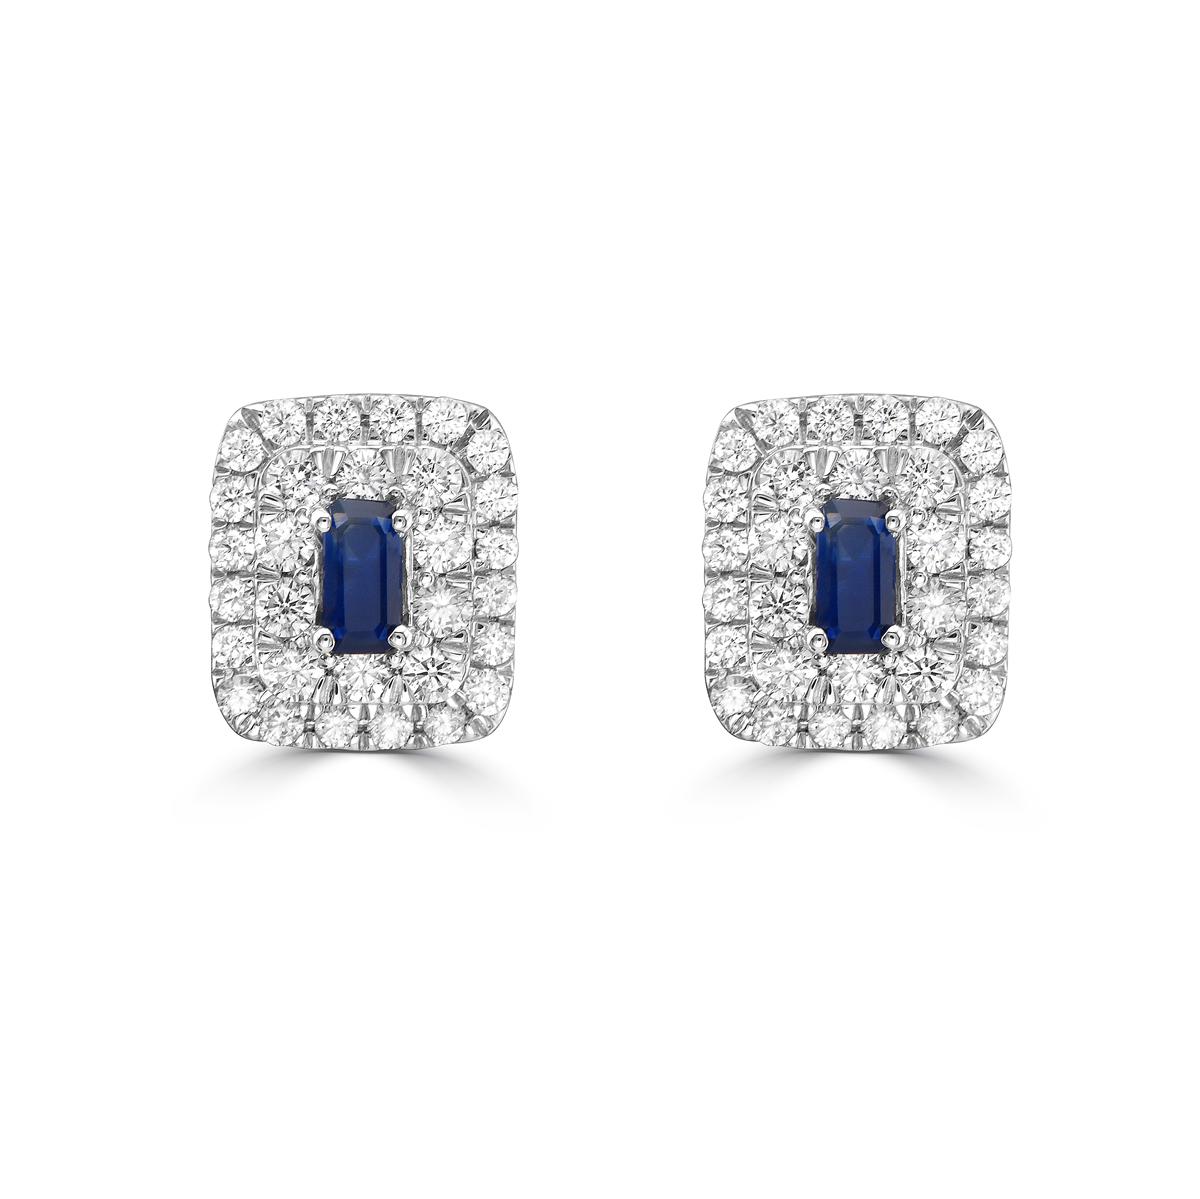 Indulge in luxury with our Blue Sapphire Baguette and Diamond Double Halo Stud Earrings. Featuring stunning baguette-cut blue sapphires, these earrings exude sophistication and exclusivity. The dazzling double halo design with accompanying diamonds